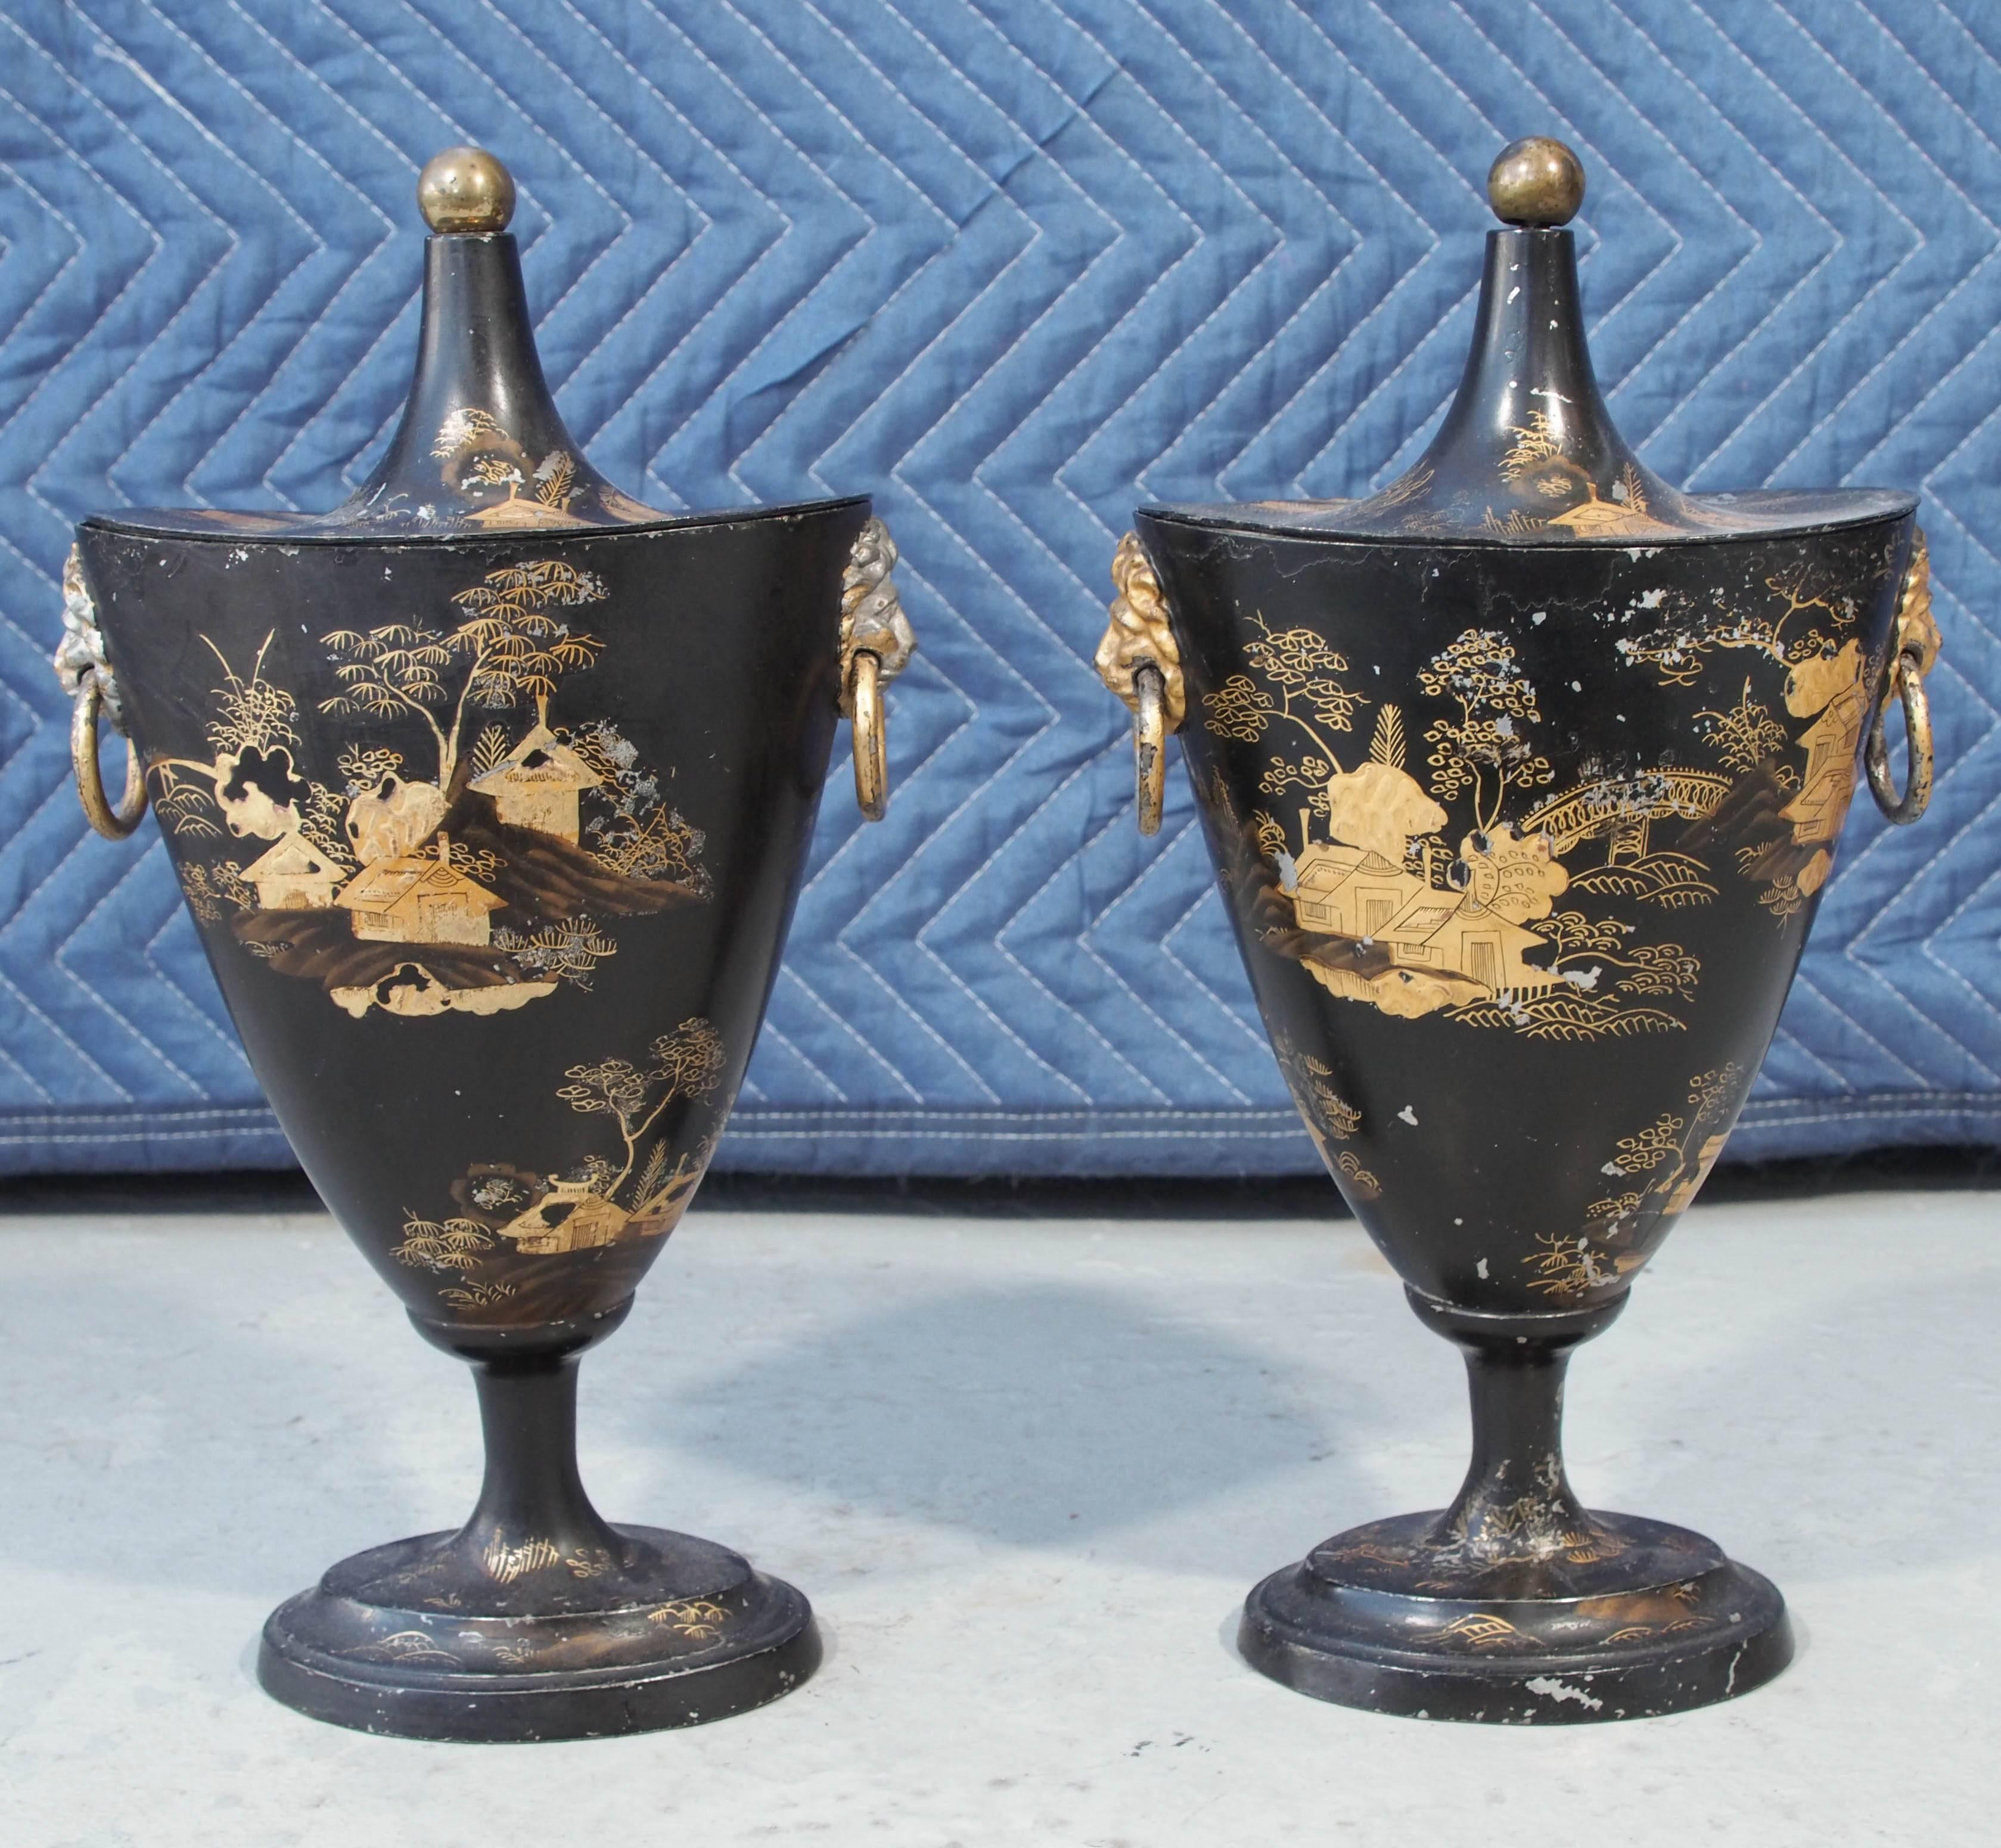 Pair of Early 19th Century Tole Piente Chestnut Urns with Chinoiserie Decoration For Sale 2